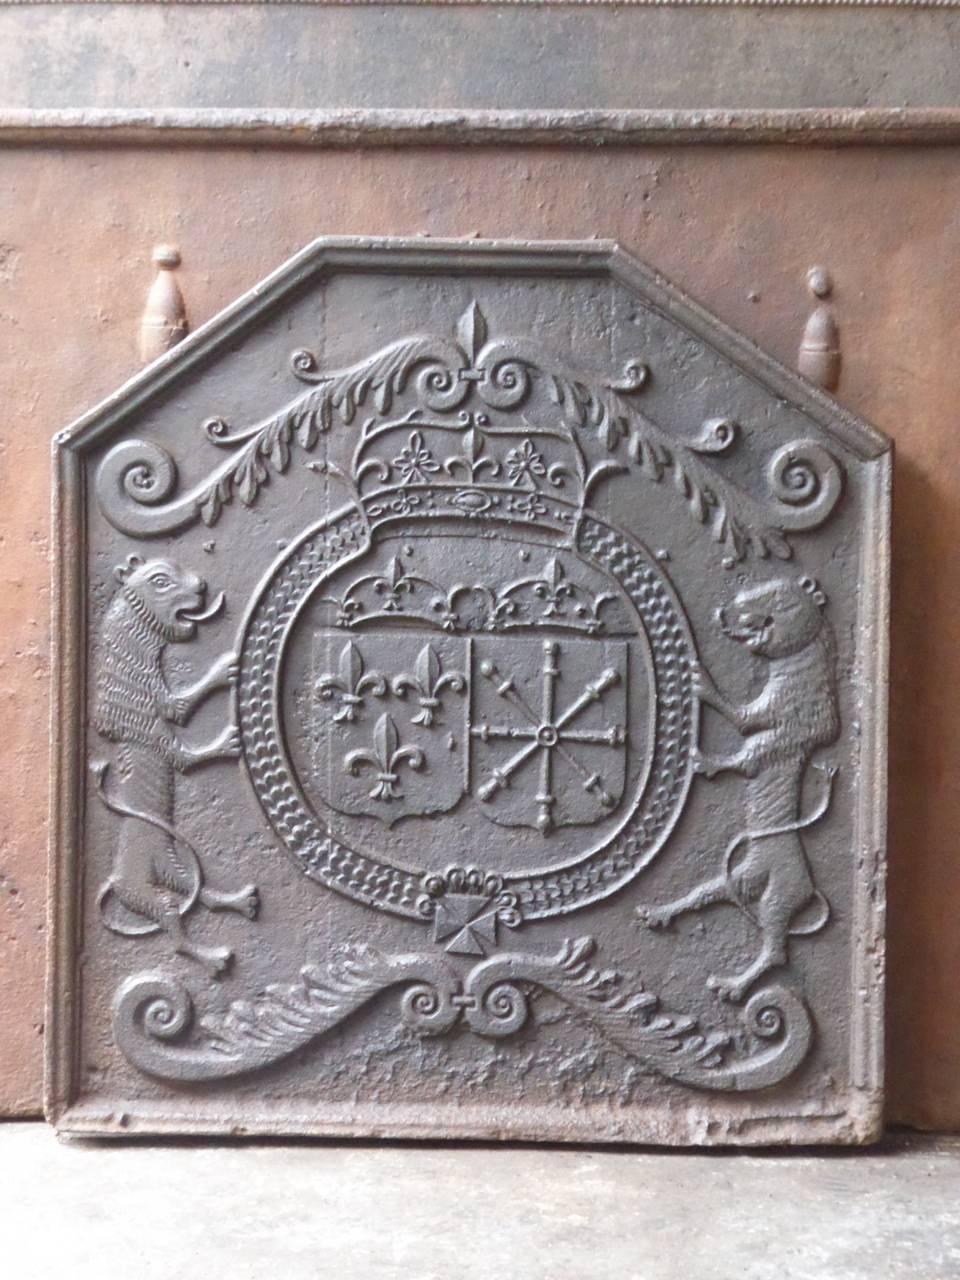 17th century French fireback with the arms of France and Navarre.

Arms of the House of Bourbon from France, one of the major royal dynasties of Europe that produced monarchs Spain (Navarre), France, the two Sicilies and Parma. Bourbon kings ruled